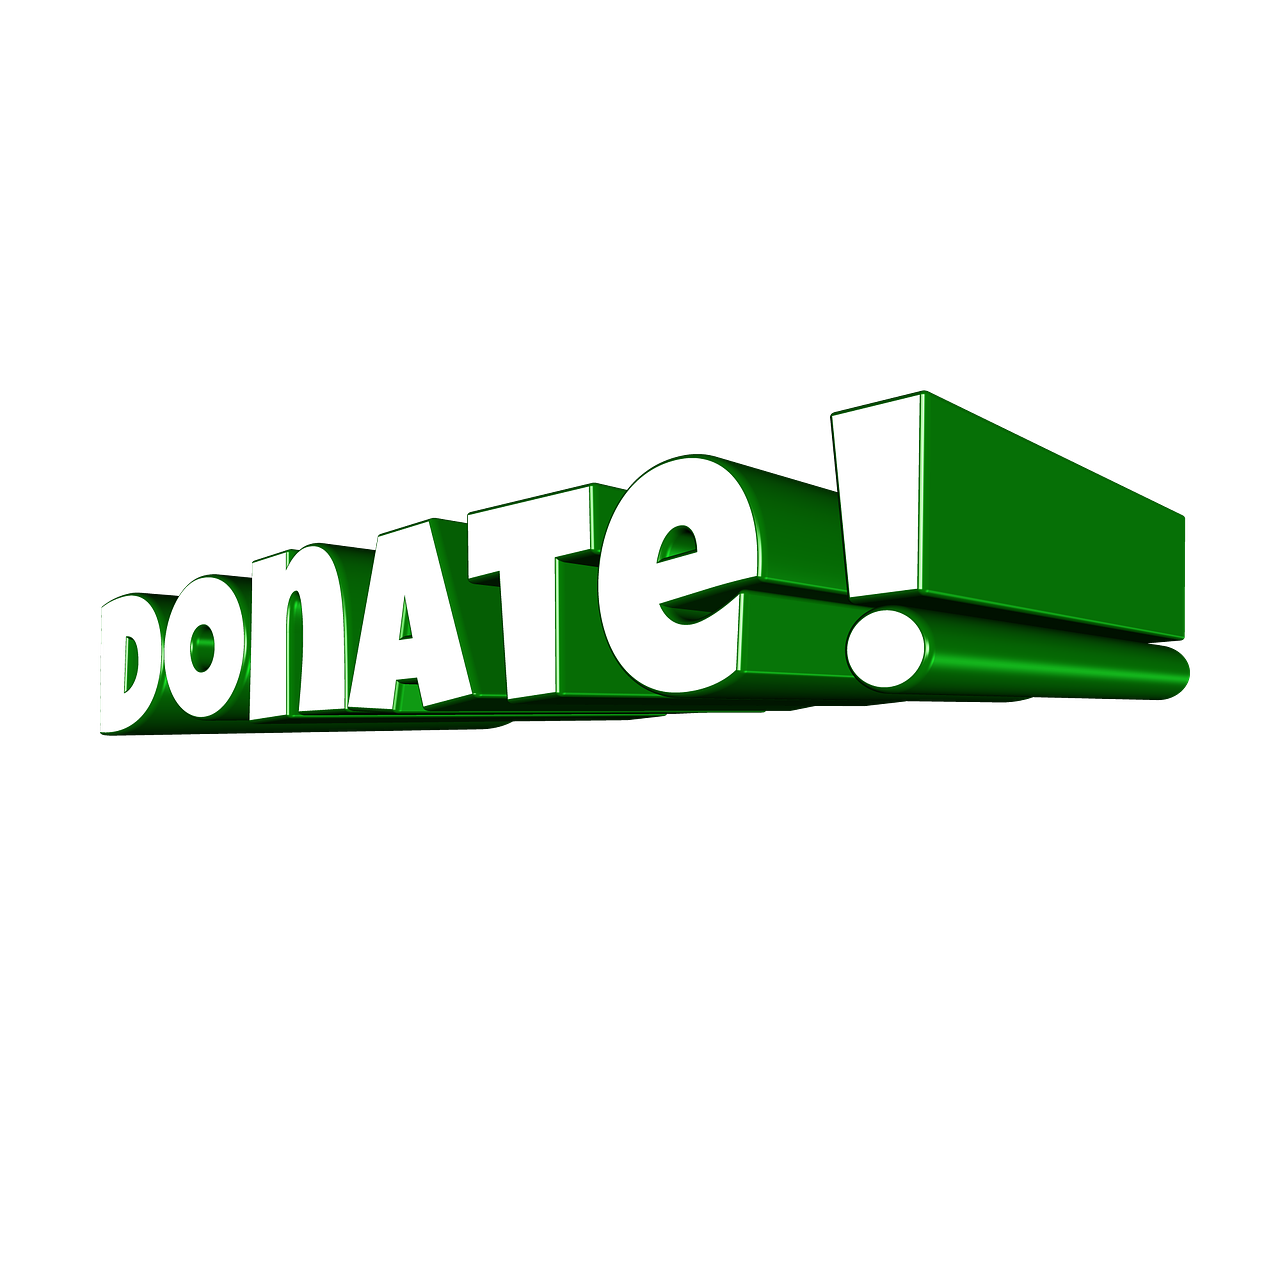 donation font lettering free photo